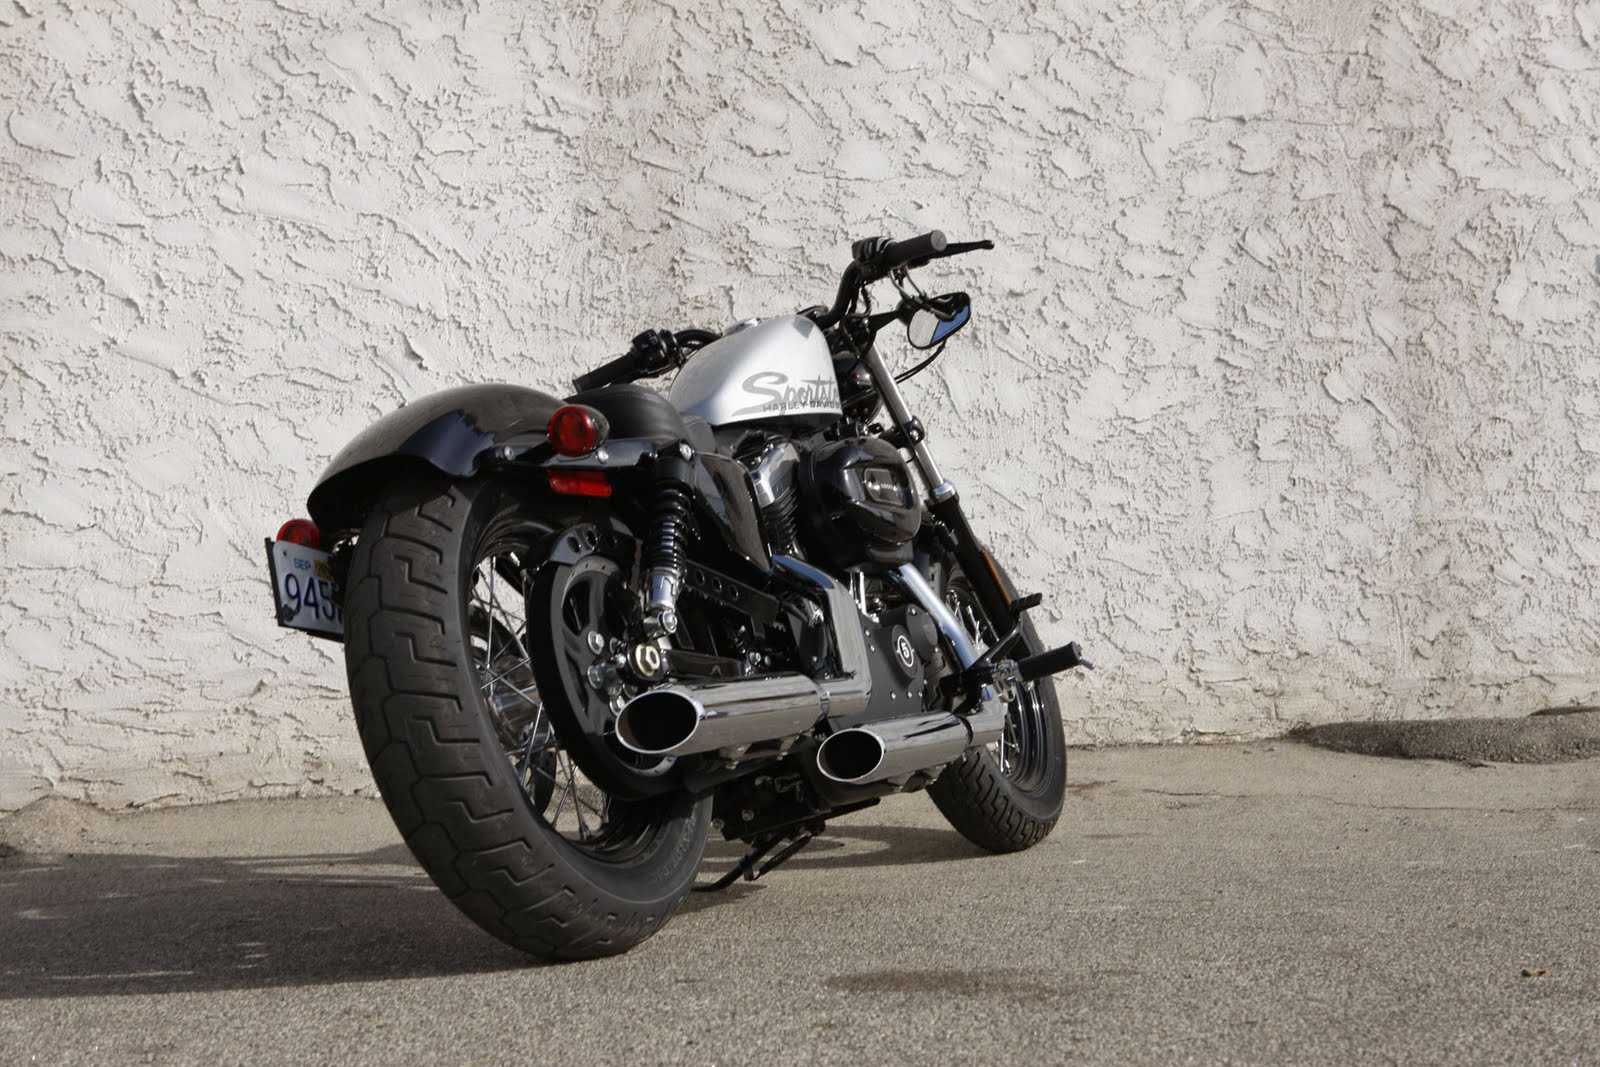 Harley Davidson Sportster Forty Eight. Motorcycle Wallpaper